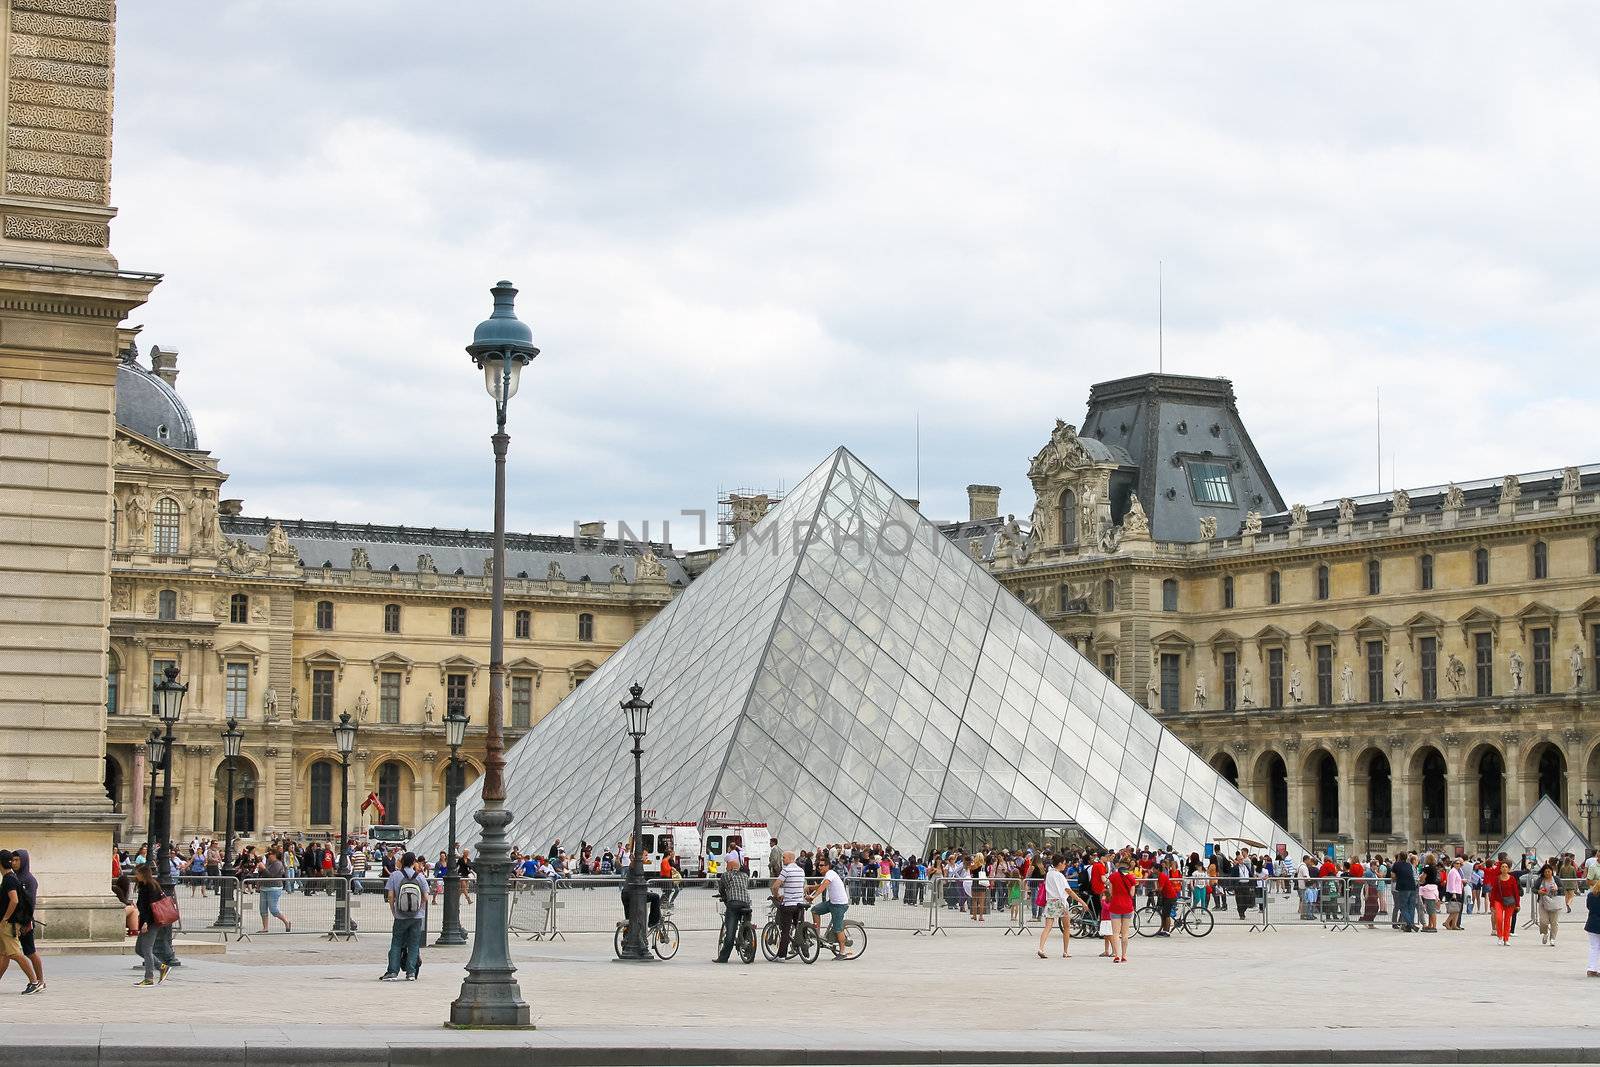 People in the square in front of the Louvre. Paris. France by NickNick